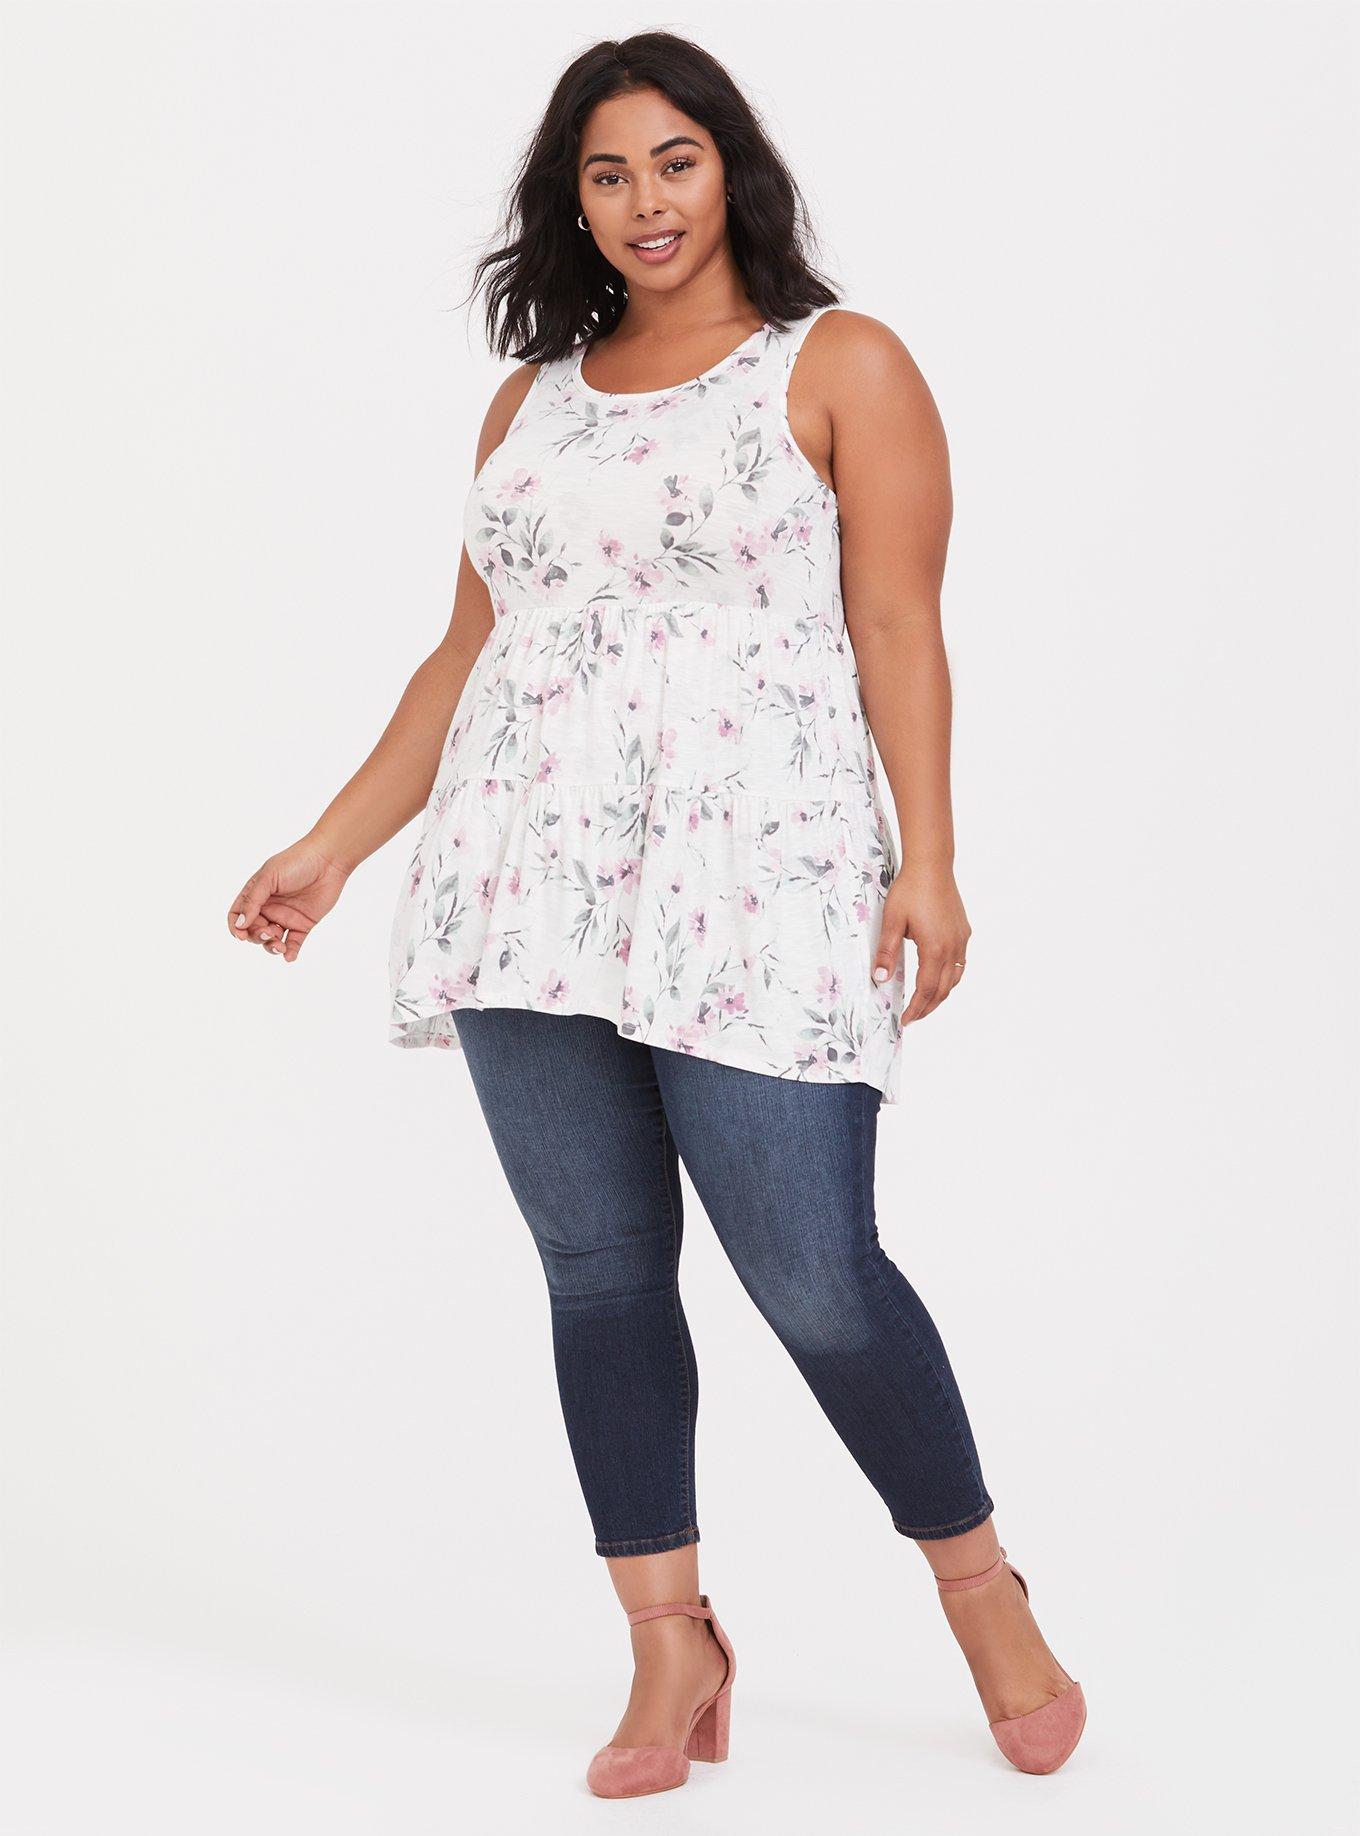 New PLUS SIZE Womens IVORY WHITE FLORAL TIERED BABYDOLL SHIRT TUNIC 1X 2X  3X USA 